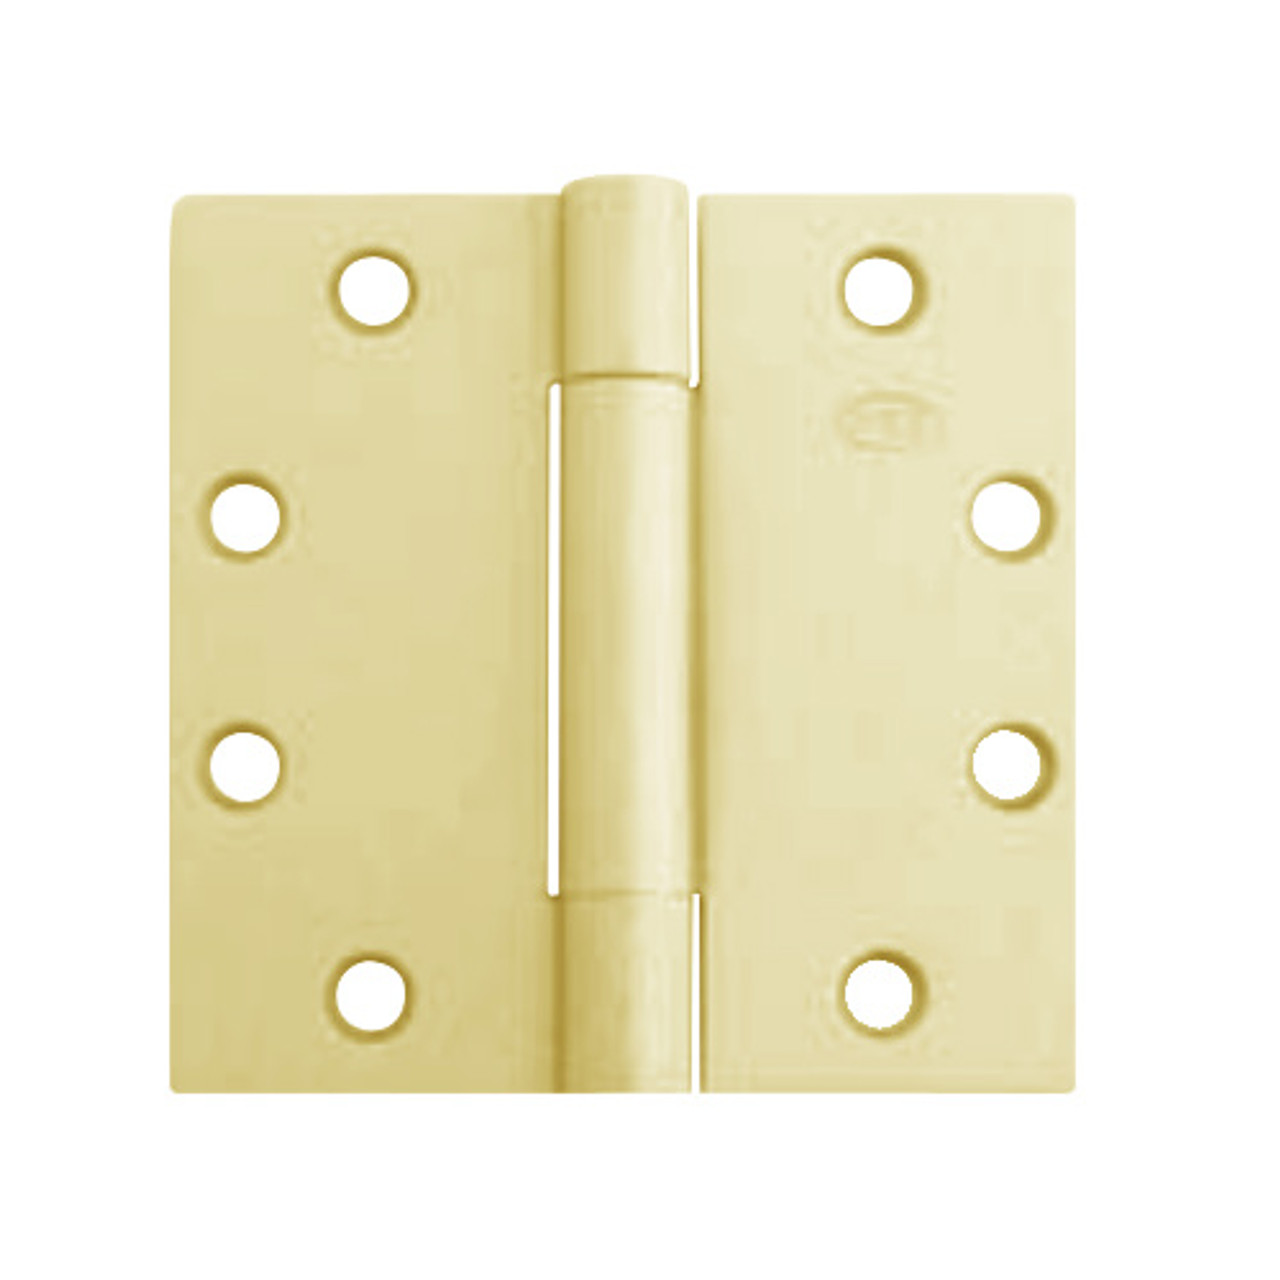 3CB1WT-4-5x5-633 IVES 3 Knuckle Concealed Bearing Full Mortise Wide Throw Butt Hinge in Satin Brass Plated